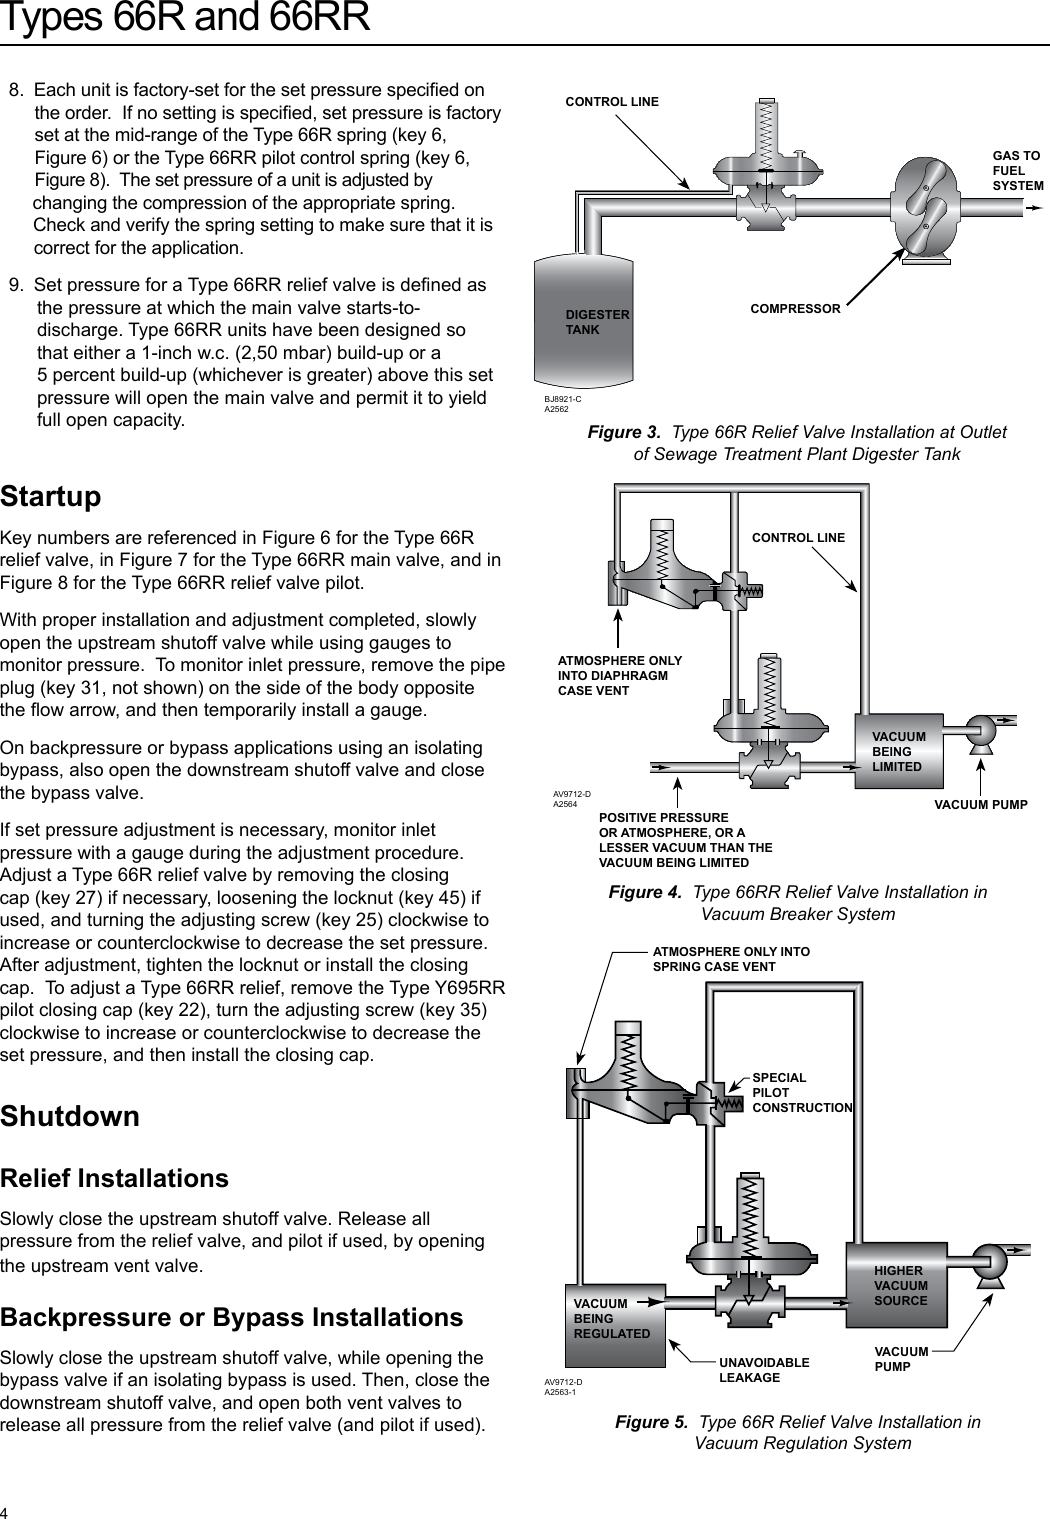 Page 4 of 12 - Emerson Emerson-66R-Series-Vapor-Recovery-Valves-Instruction-Manual-  Emerson-66r-series-vapor-recovery-valves-instruction-manual